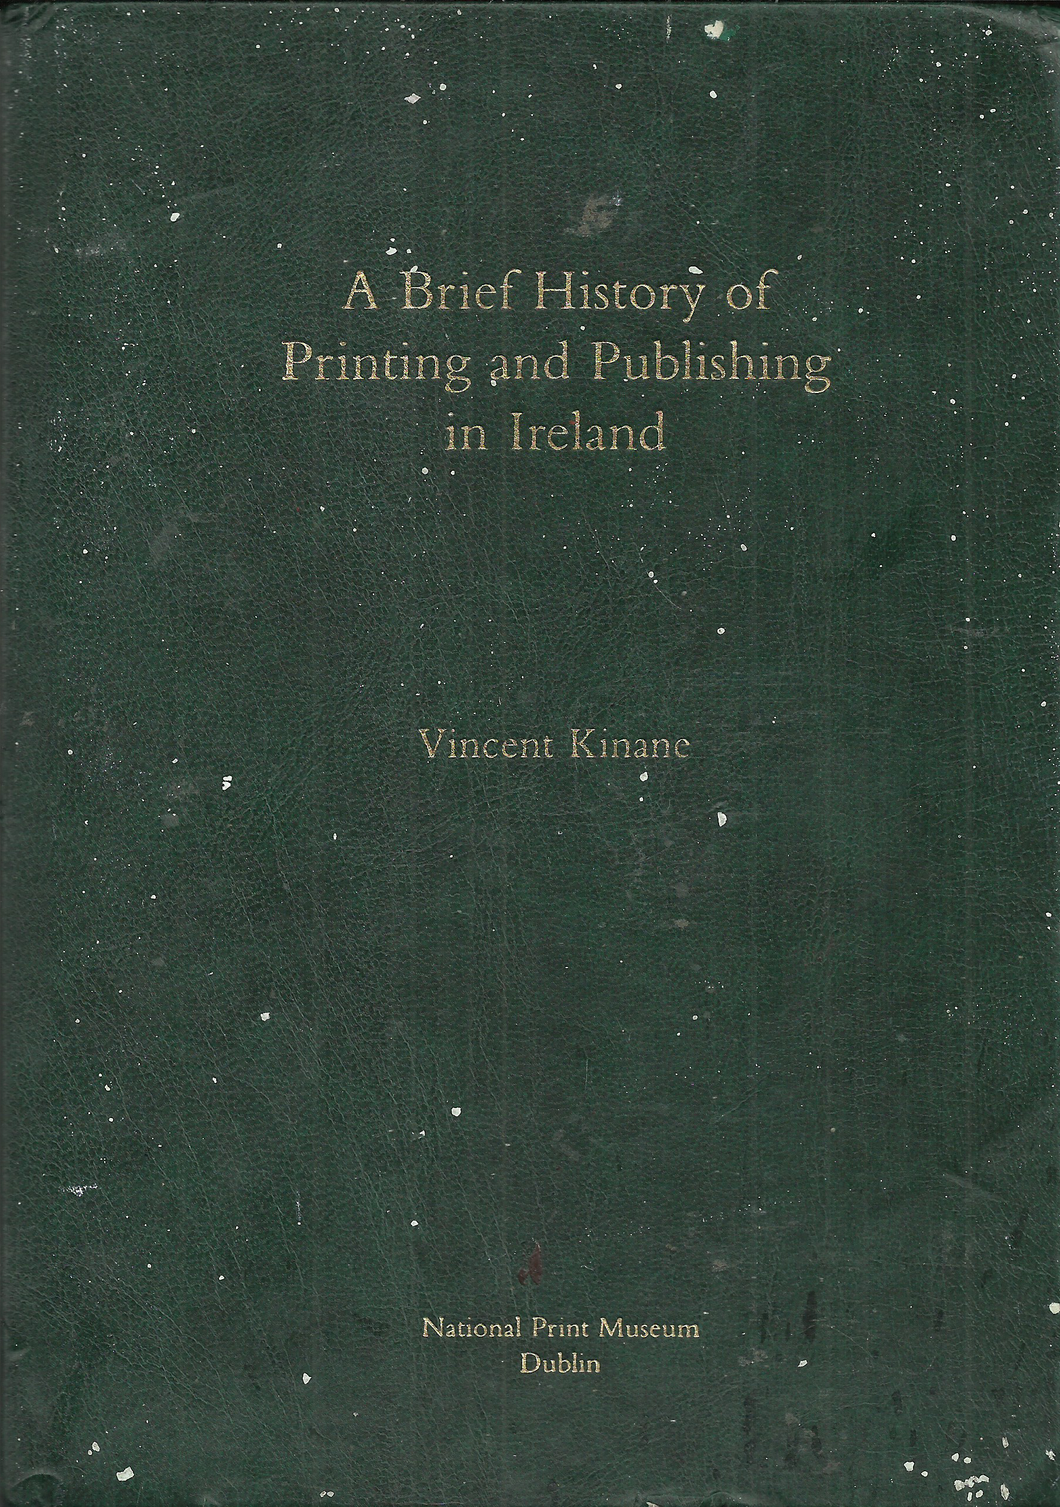 A Brief History of Printing and Publishing in Ireland